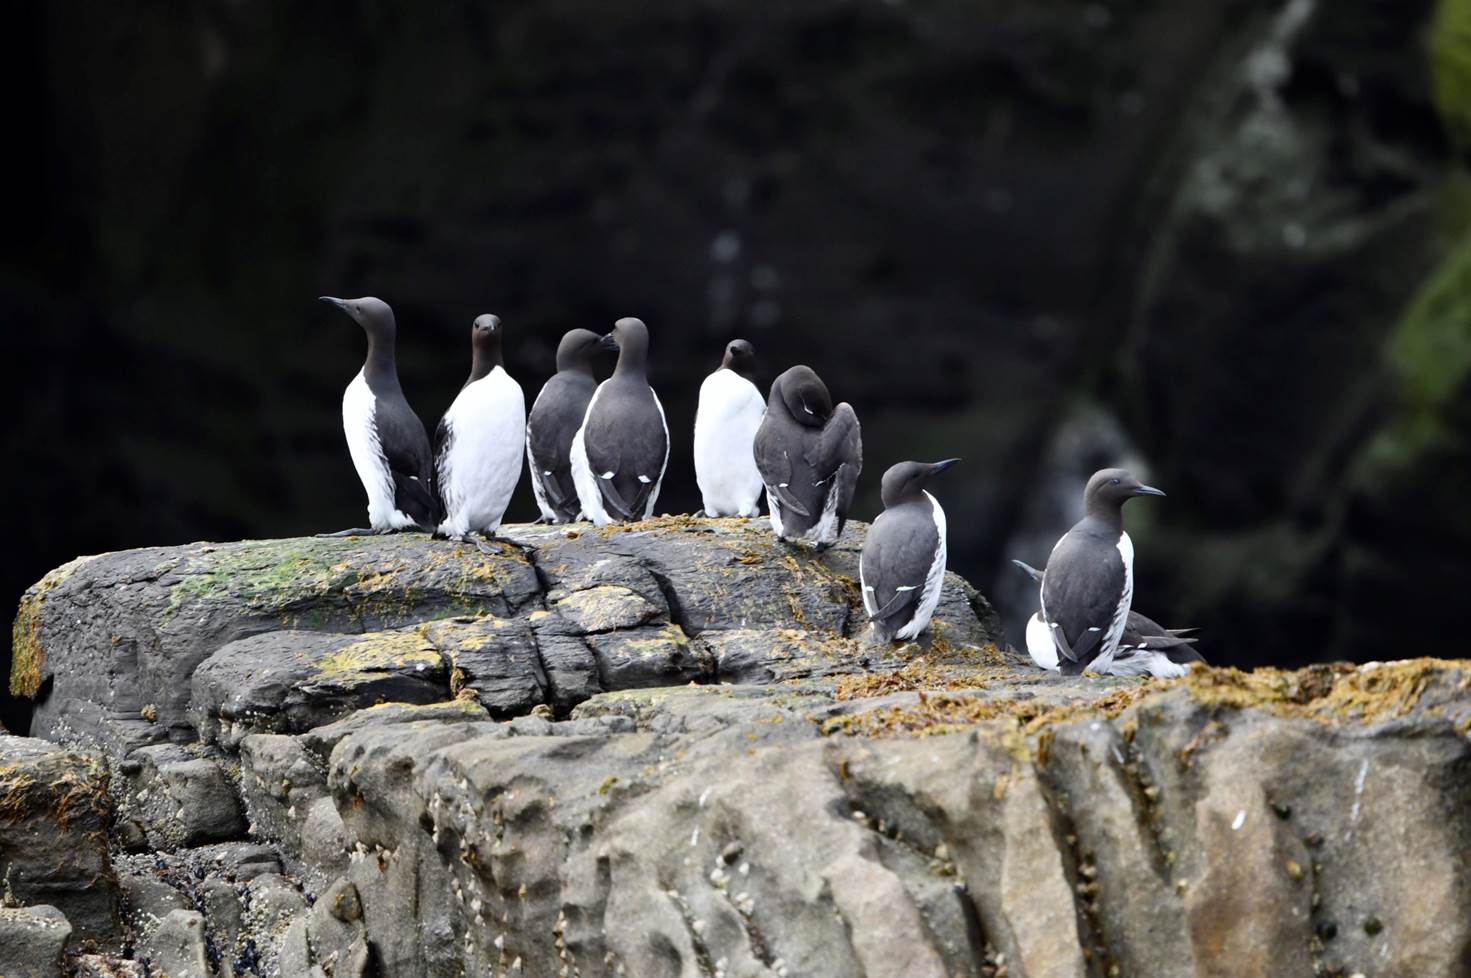 A group of penguins on a rock

Description automatically generated